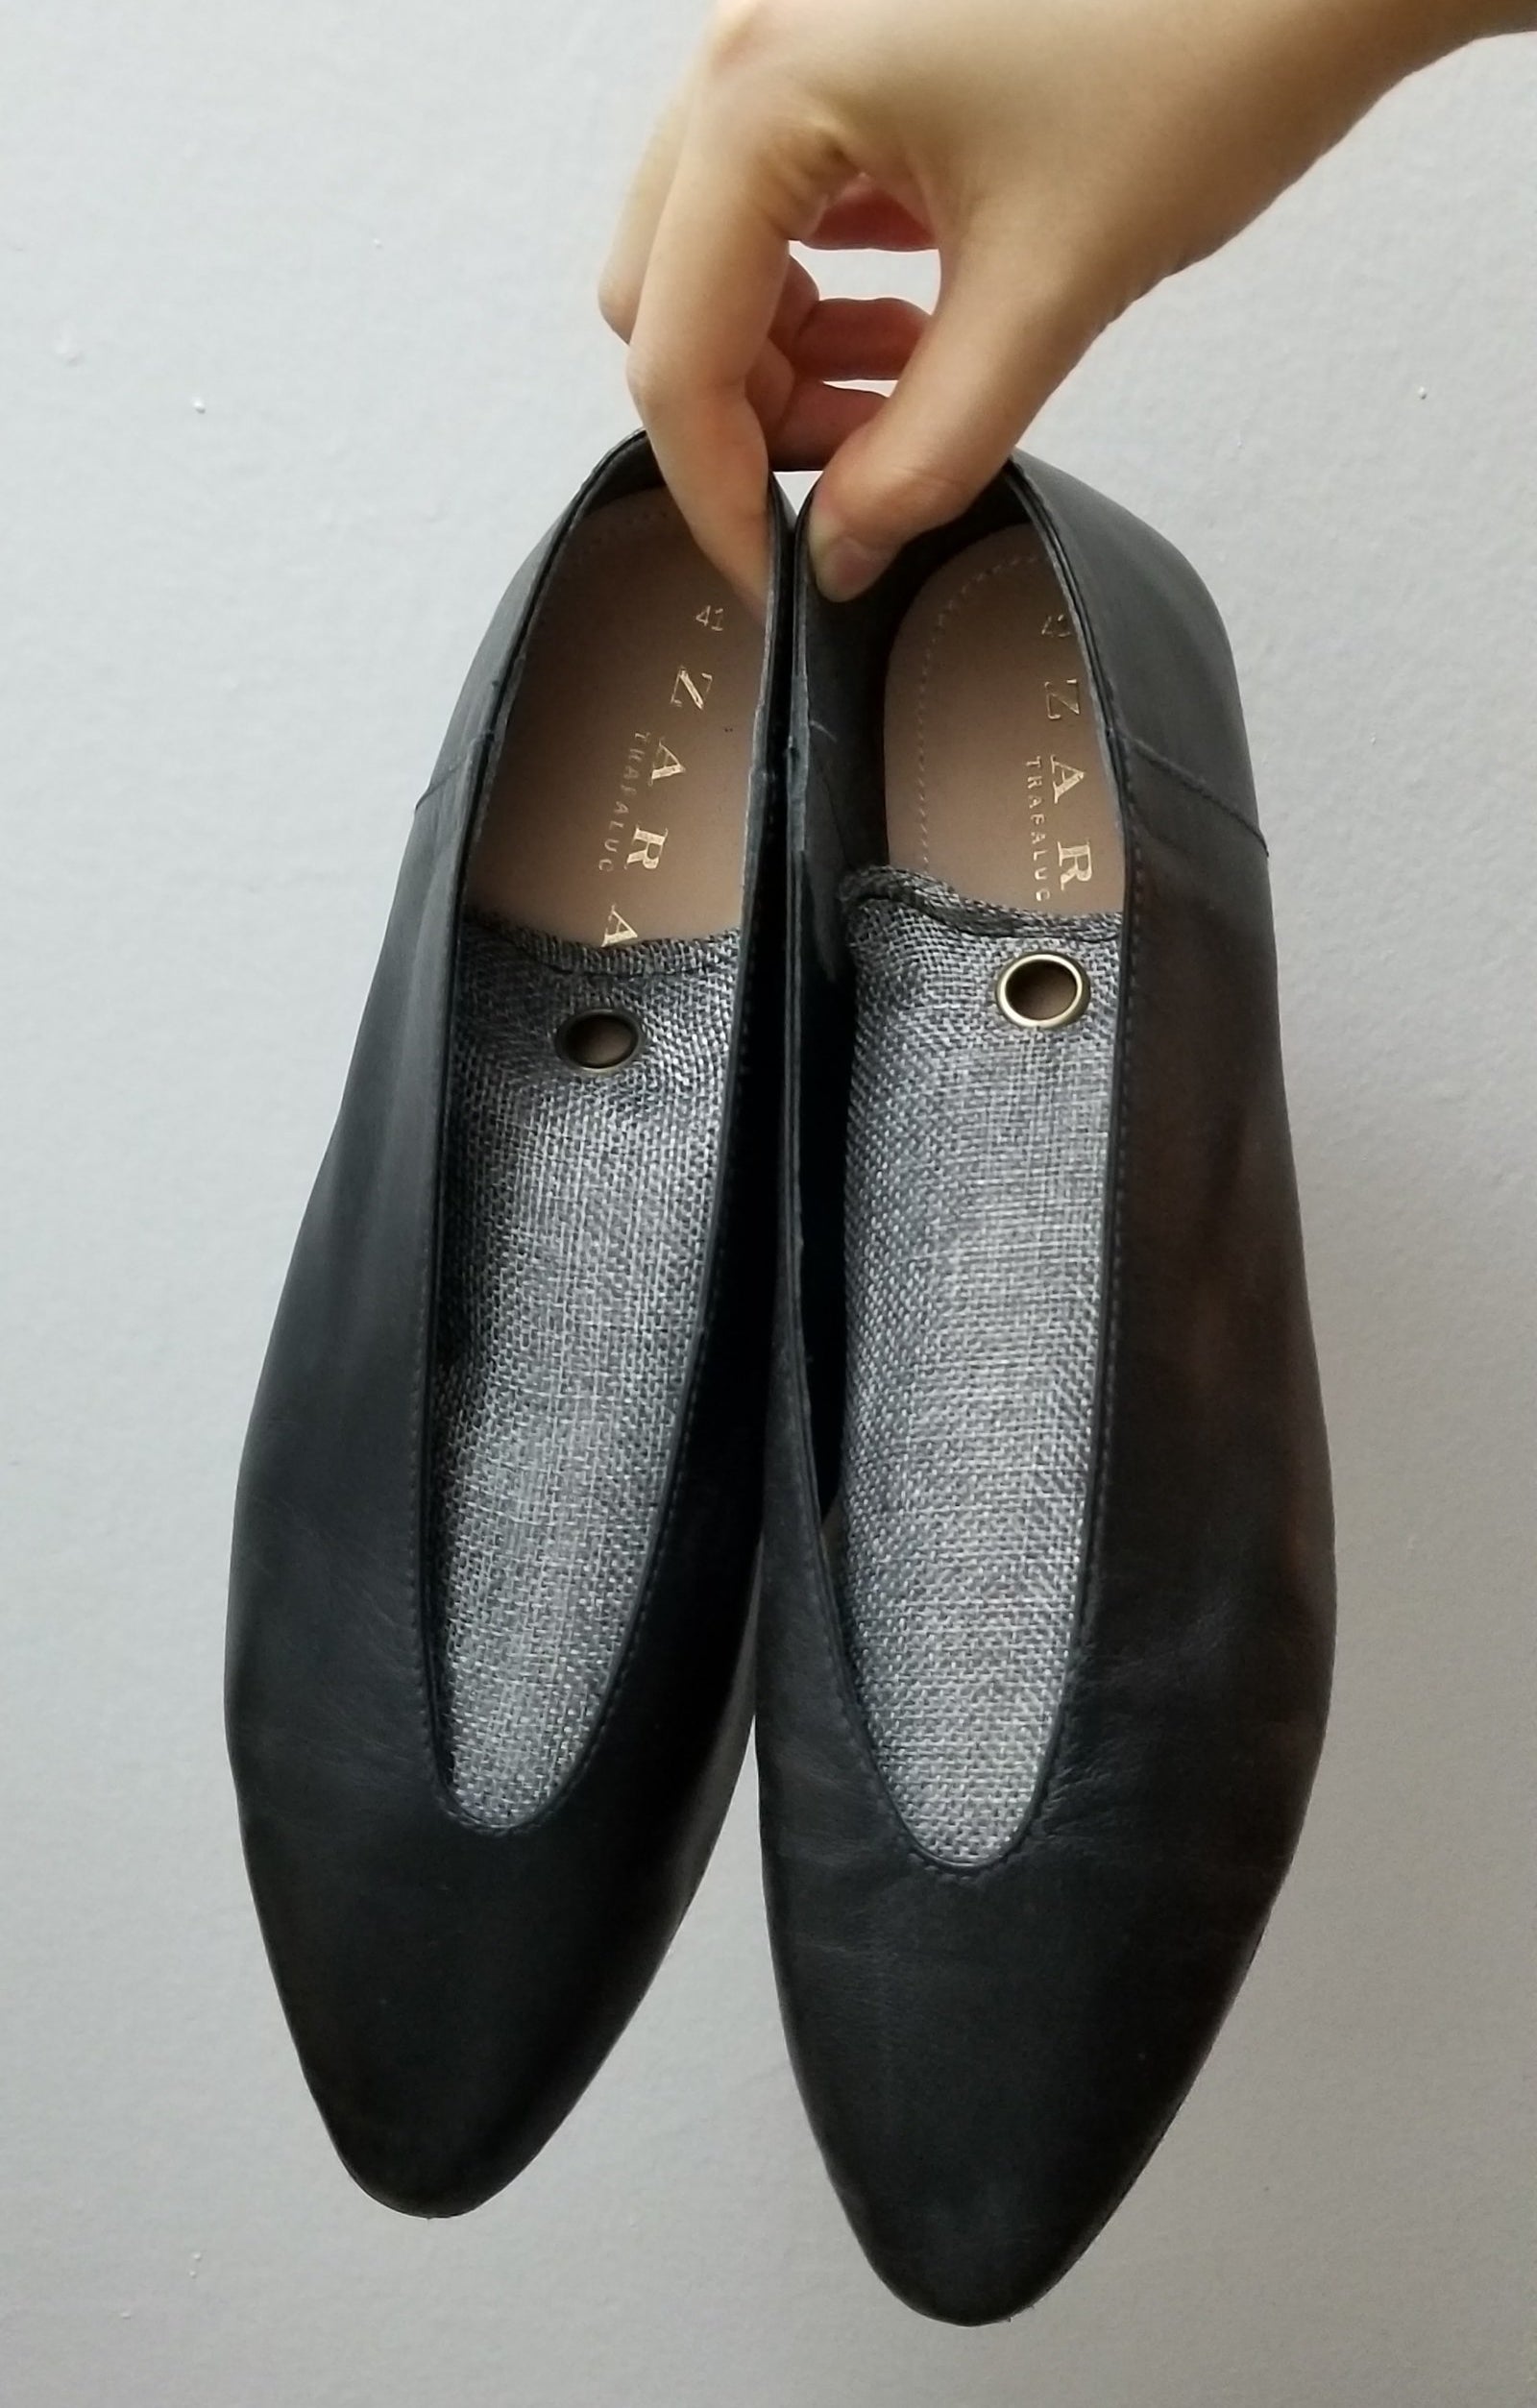 A pair of flats with the bag in them